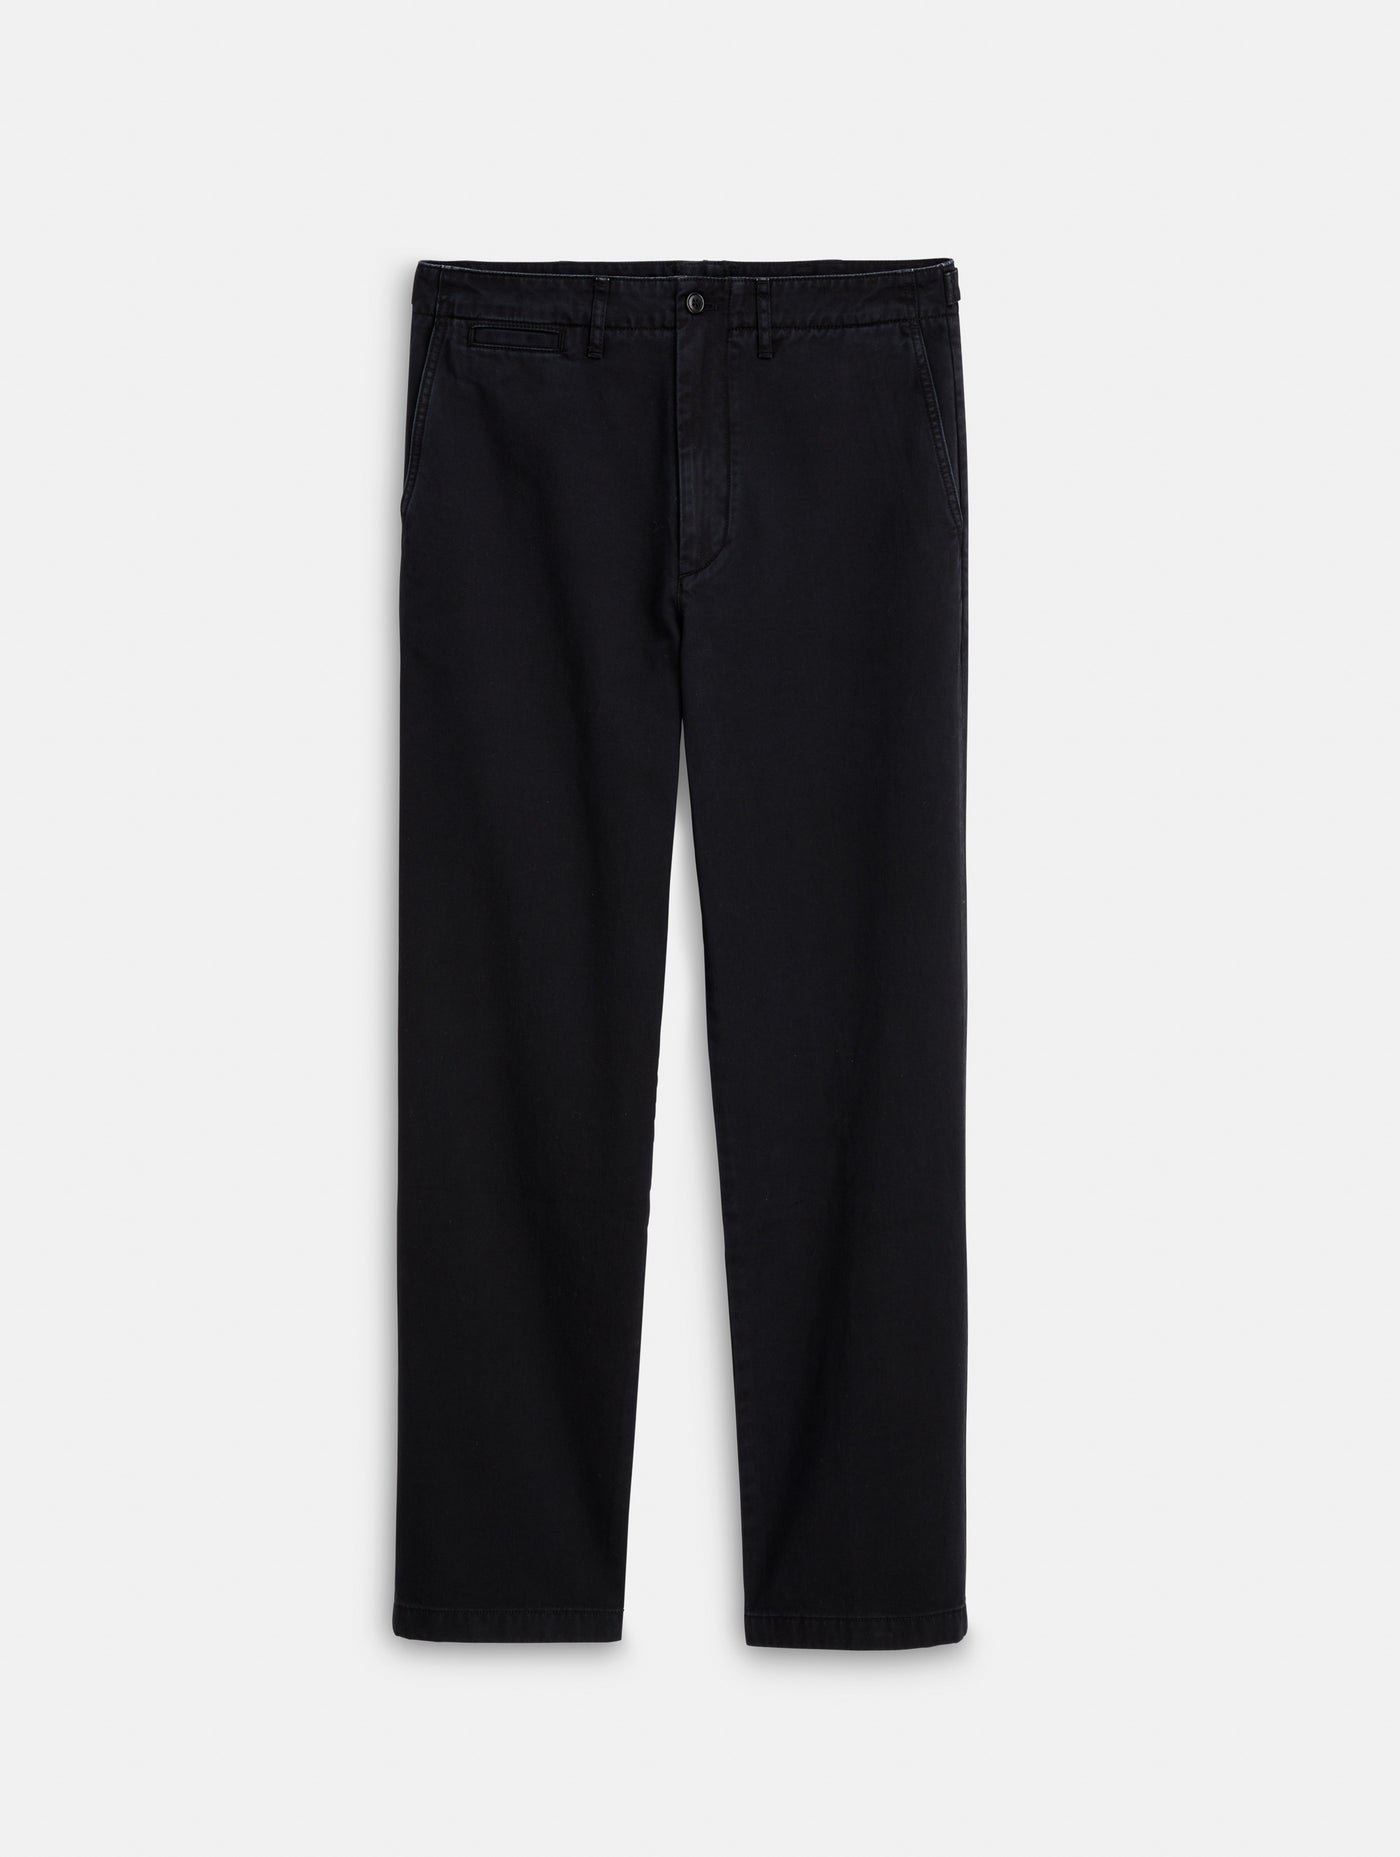 Straight Leg Pant in Vintage Washed Chino (Long Inseam) – Alex Mill